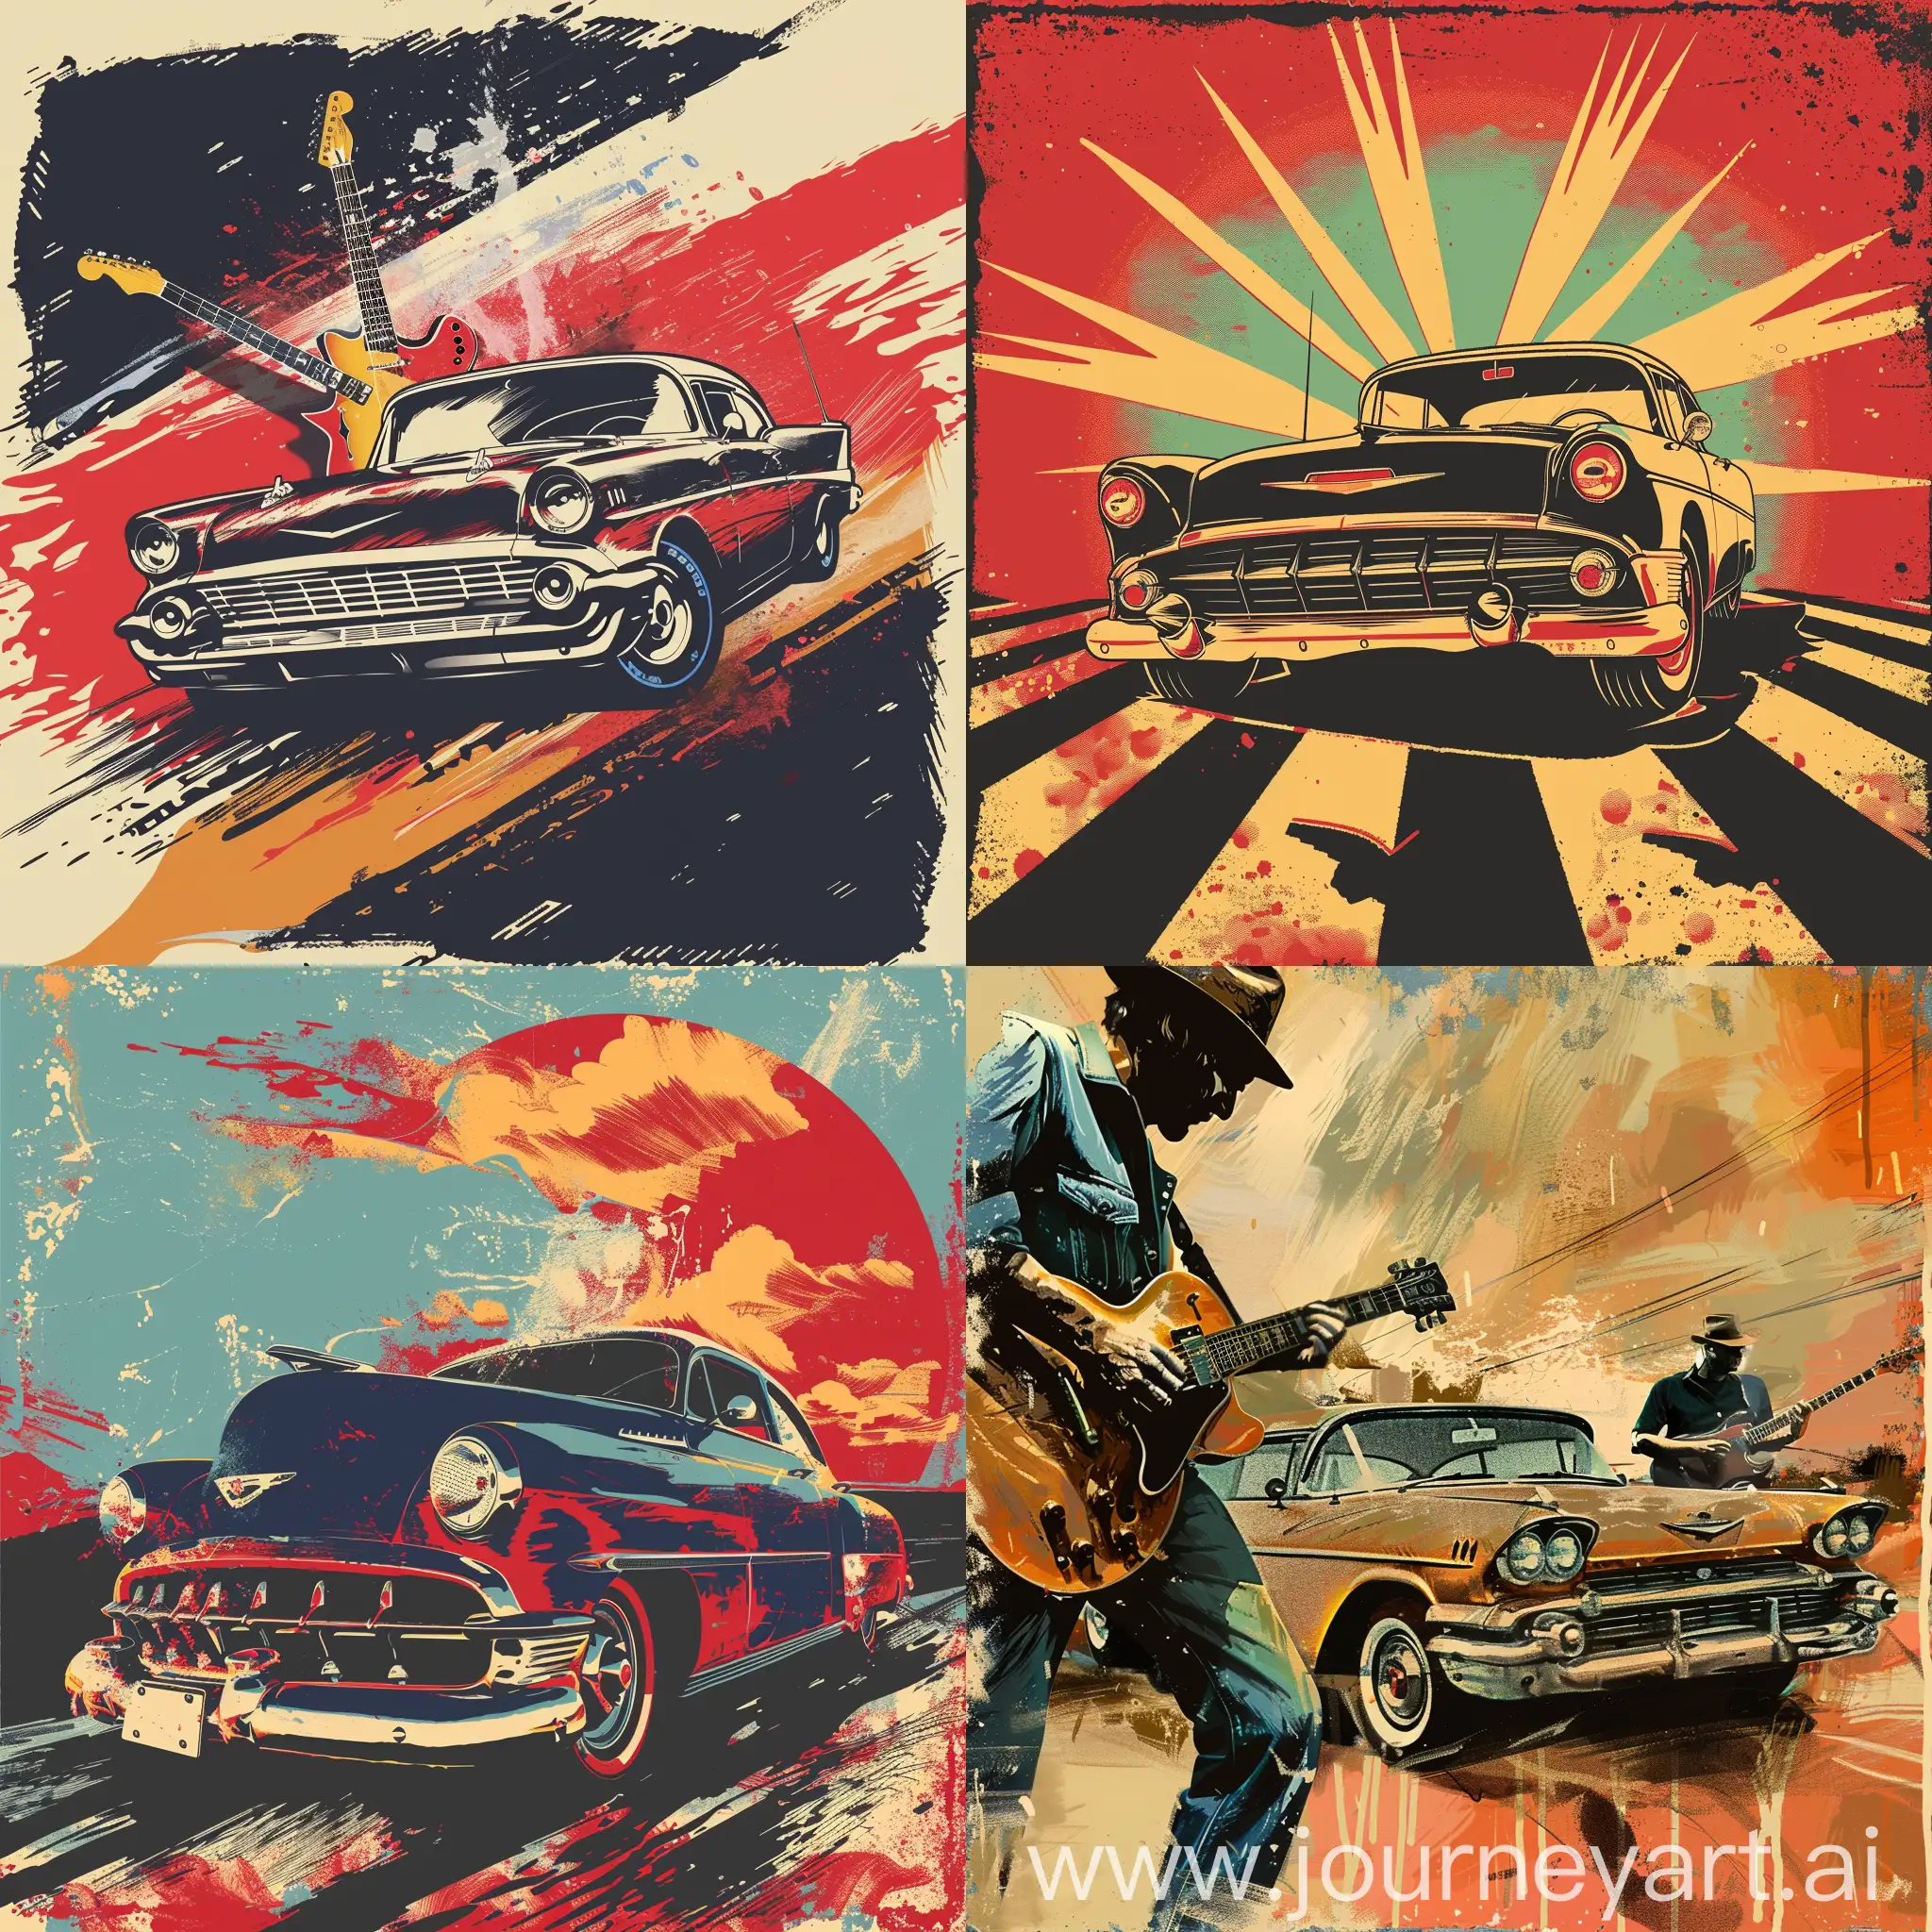 Vintage-Rock-and-Roll-Music-Playlist-Cover-with-Guitars-and-American-Car